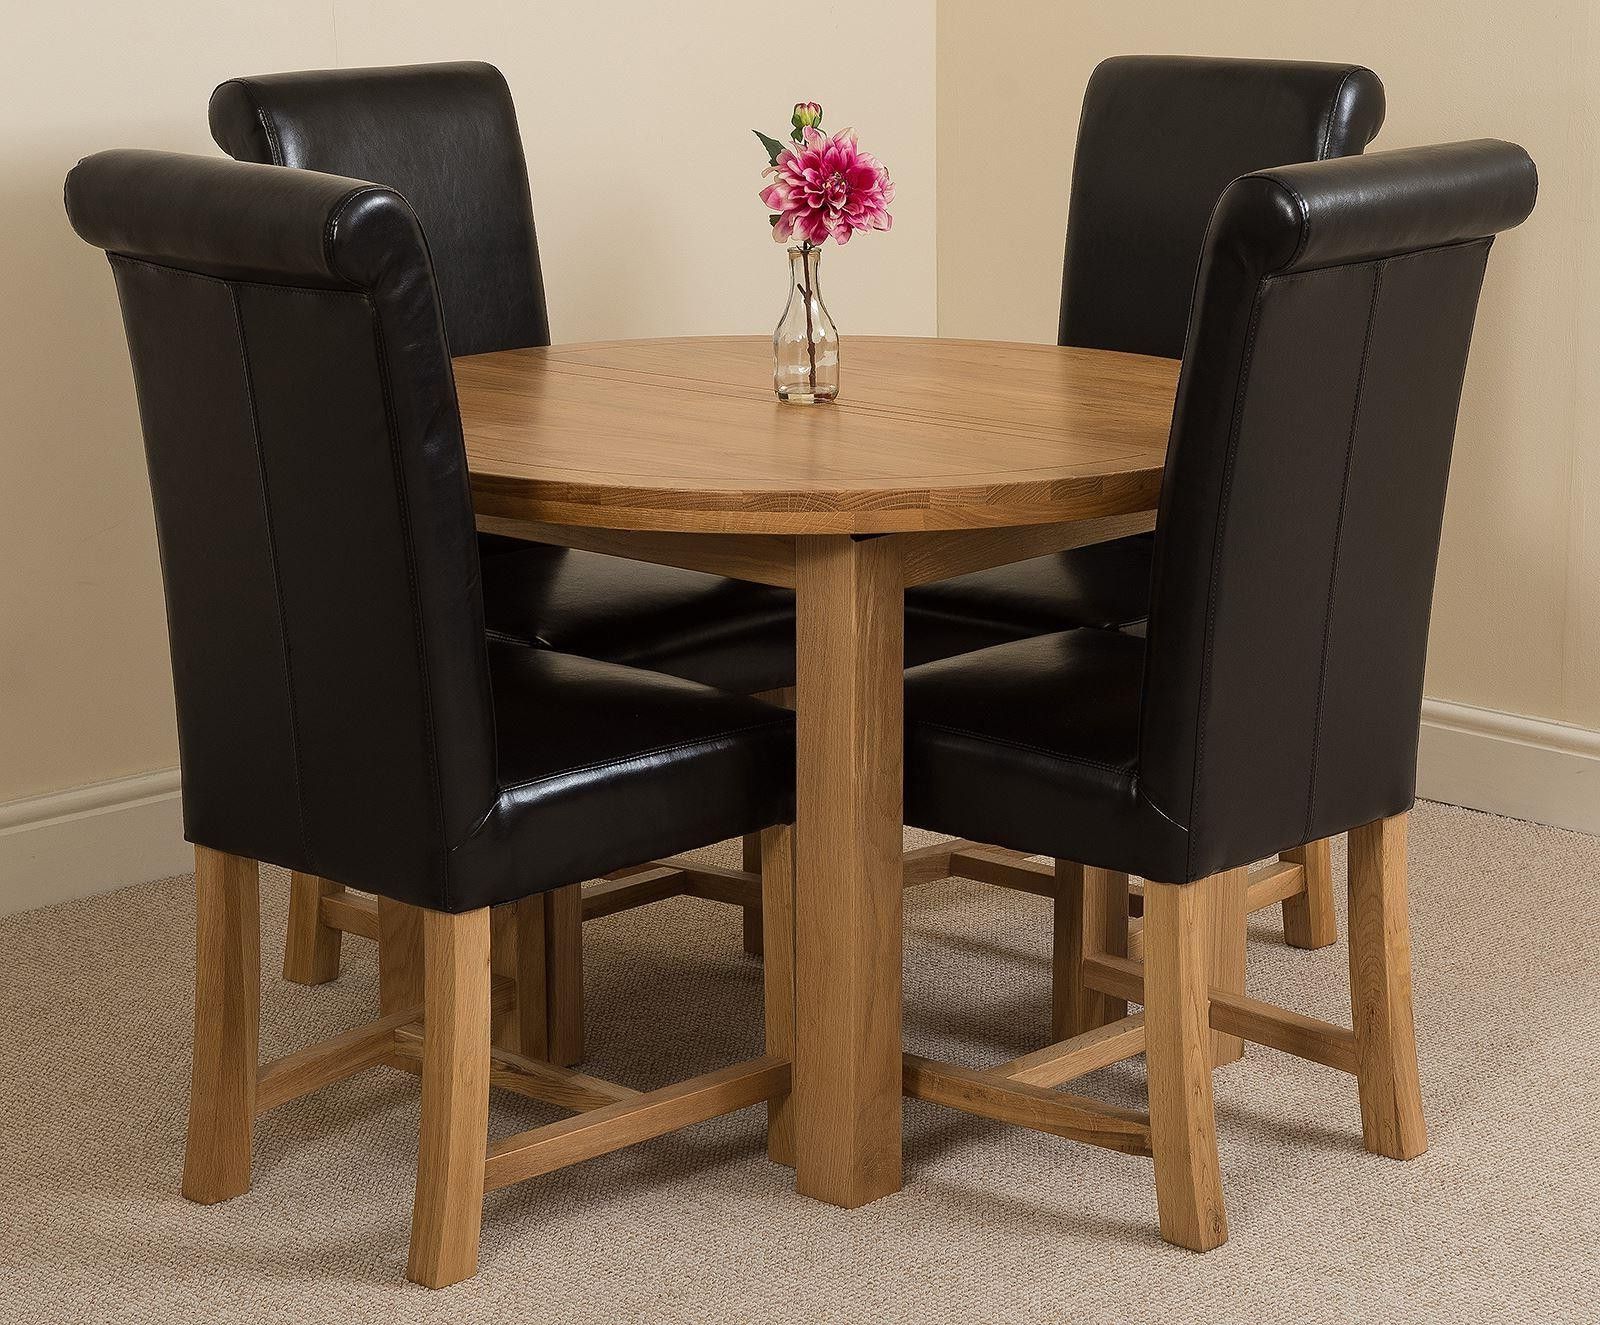 Preferred Edmonton Solid Oak Extending Oval Dining Table With 4 Washington Dining Inside Extendable Oval Patio Dining Sets (View 2 of 15)